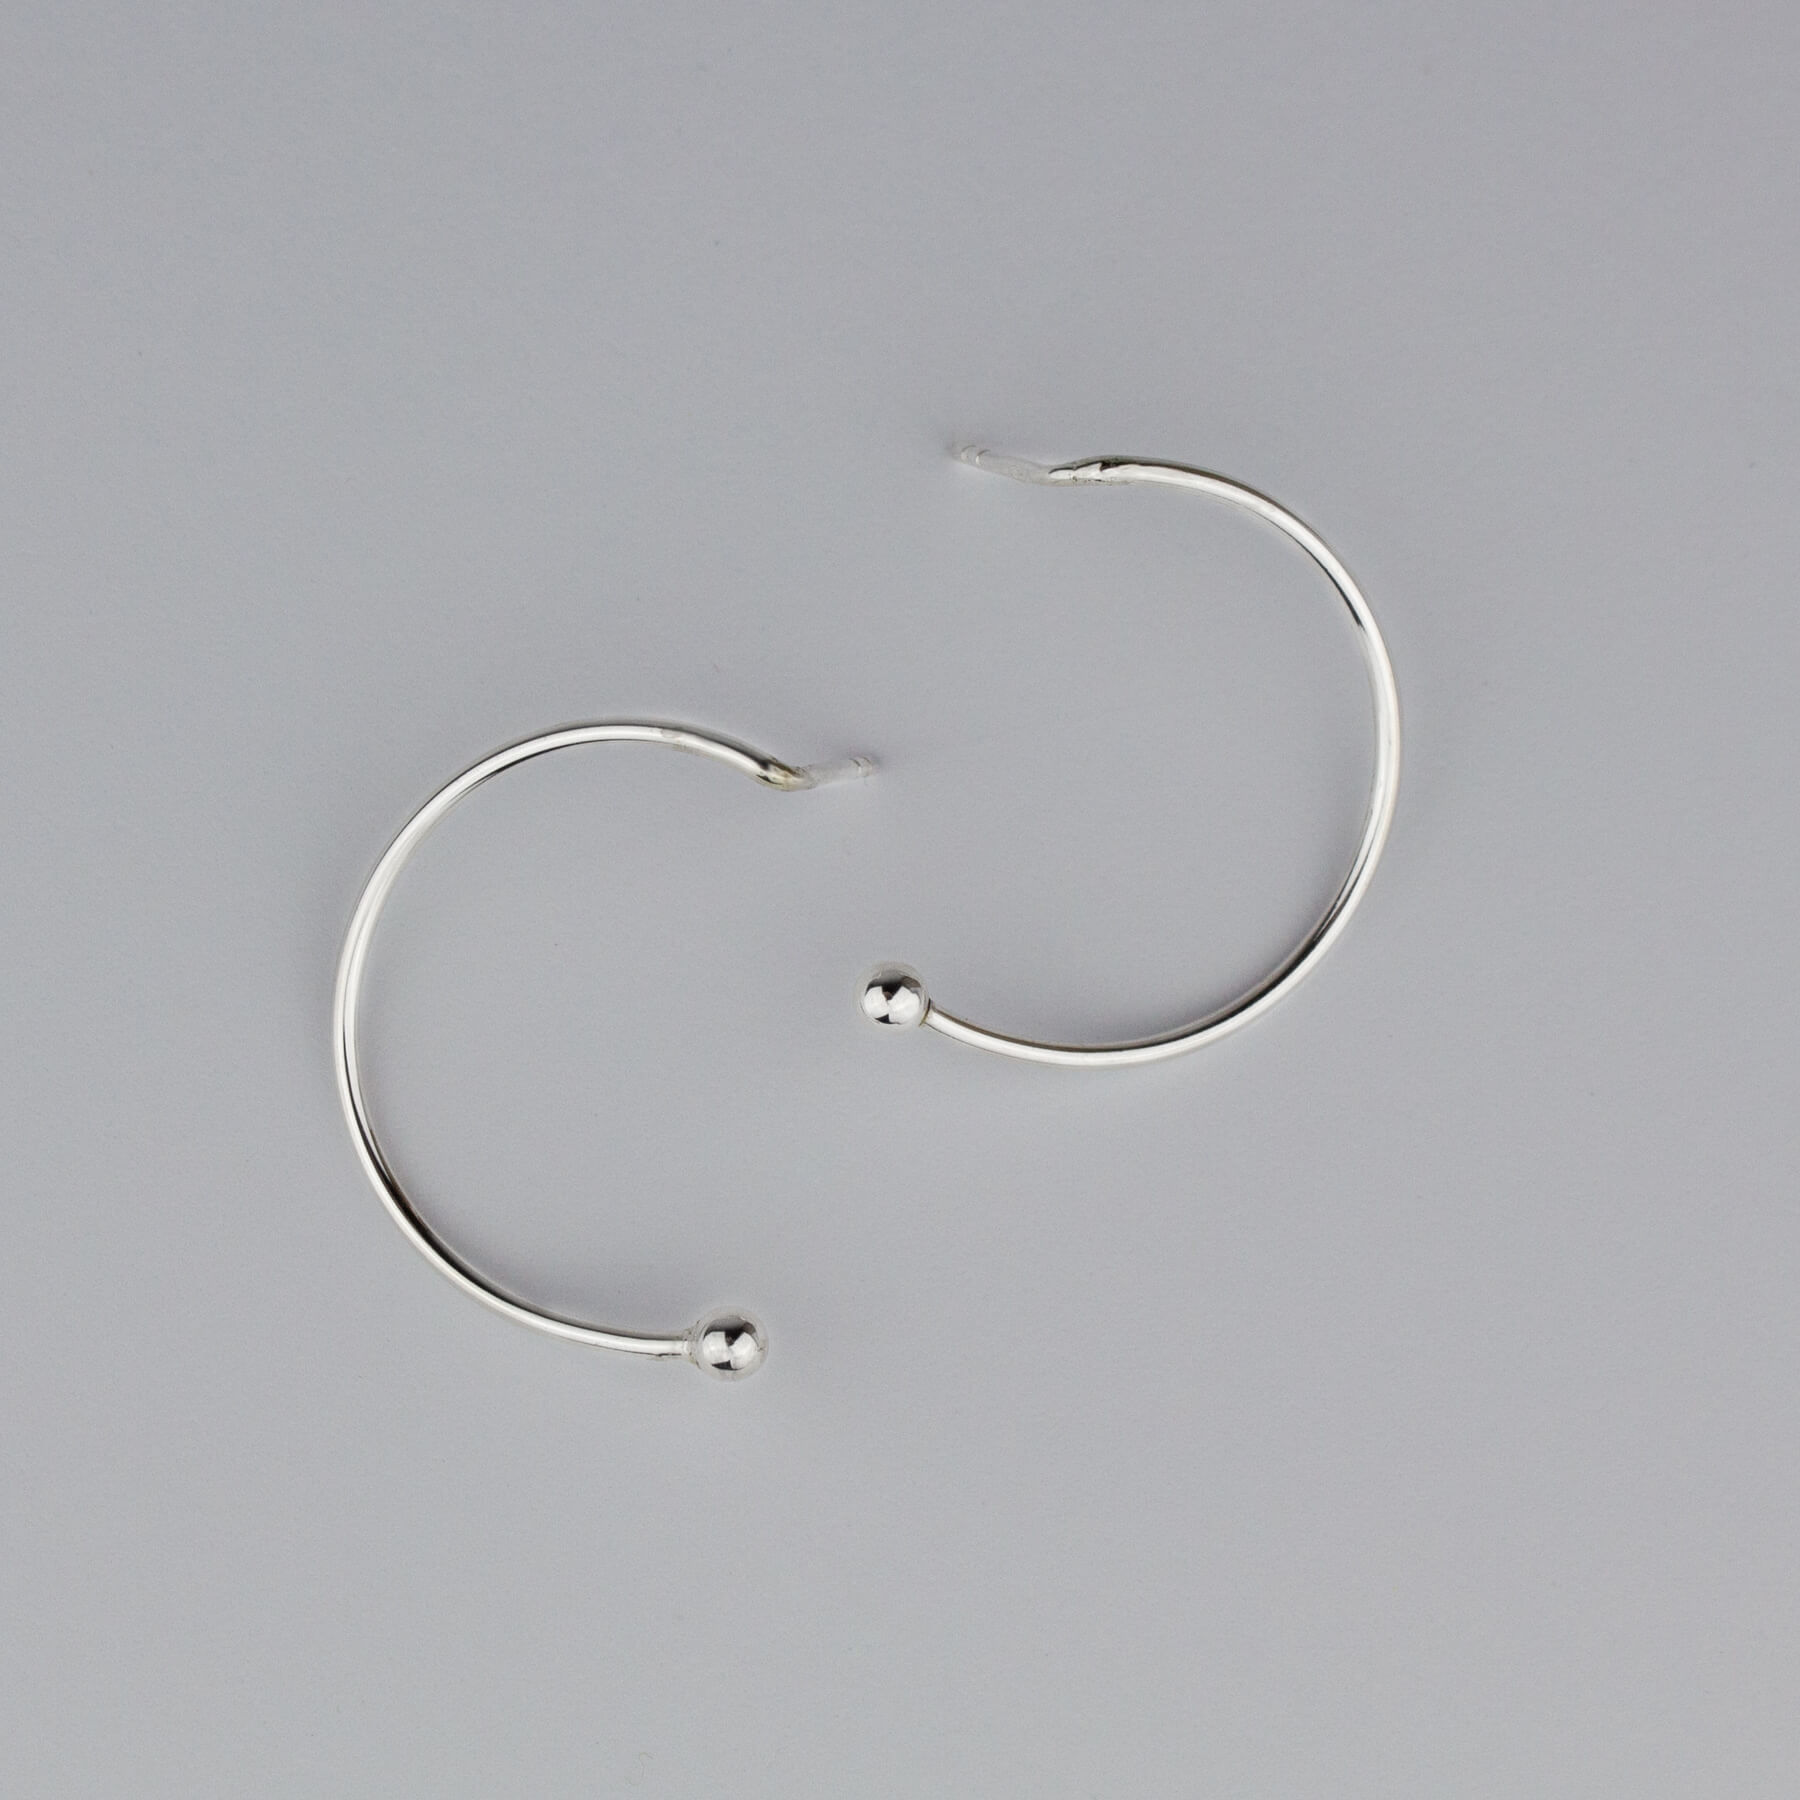 Silver semicircle earrings on white background; view from up.